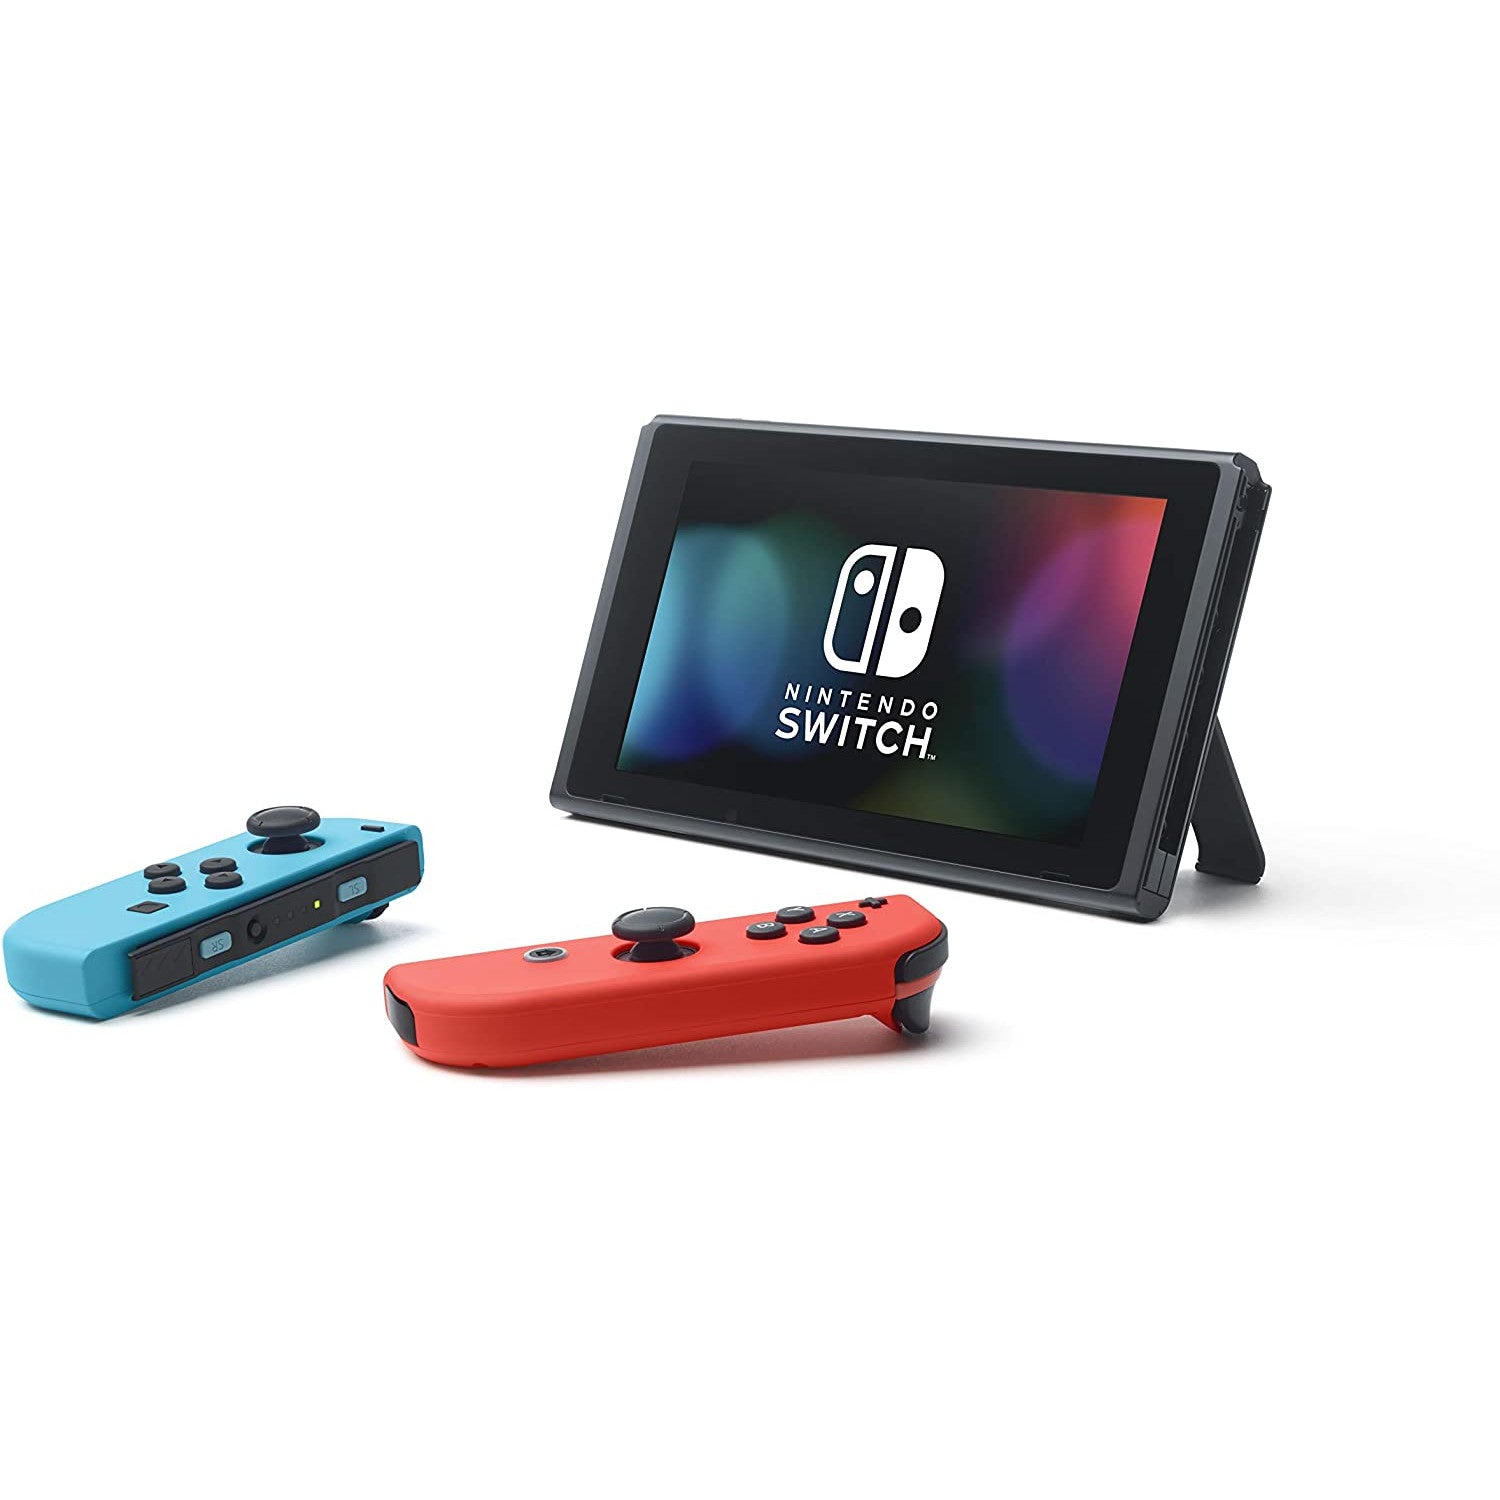 Nintendo Switch V2 Game Console - Neon With Improved Battery